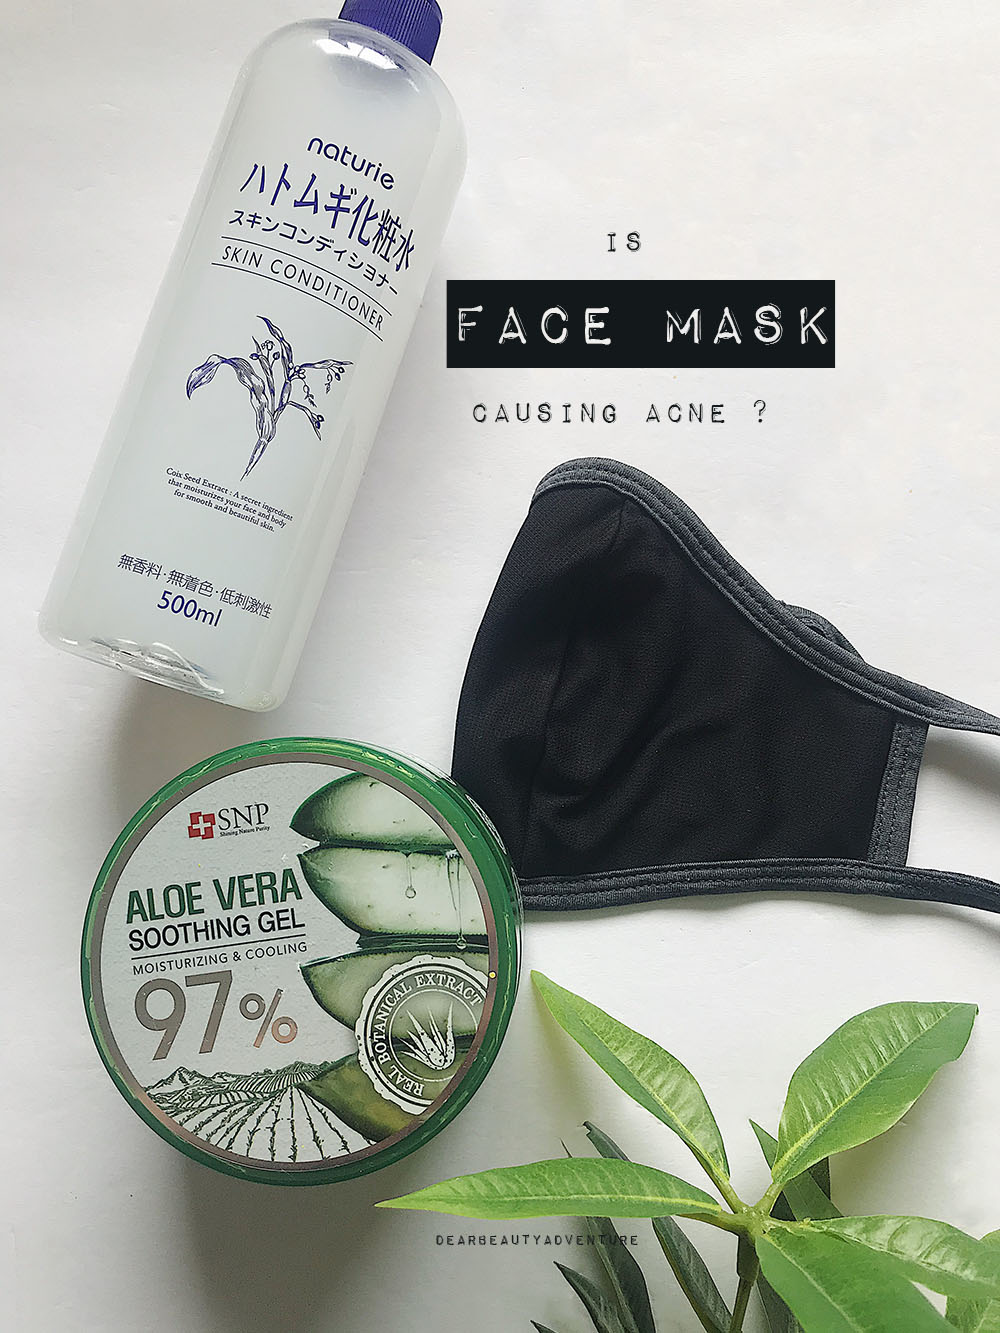 is masks causing acne